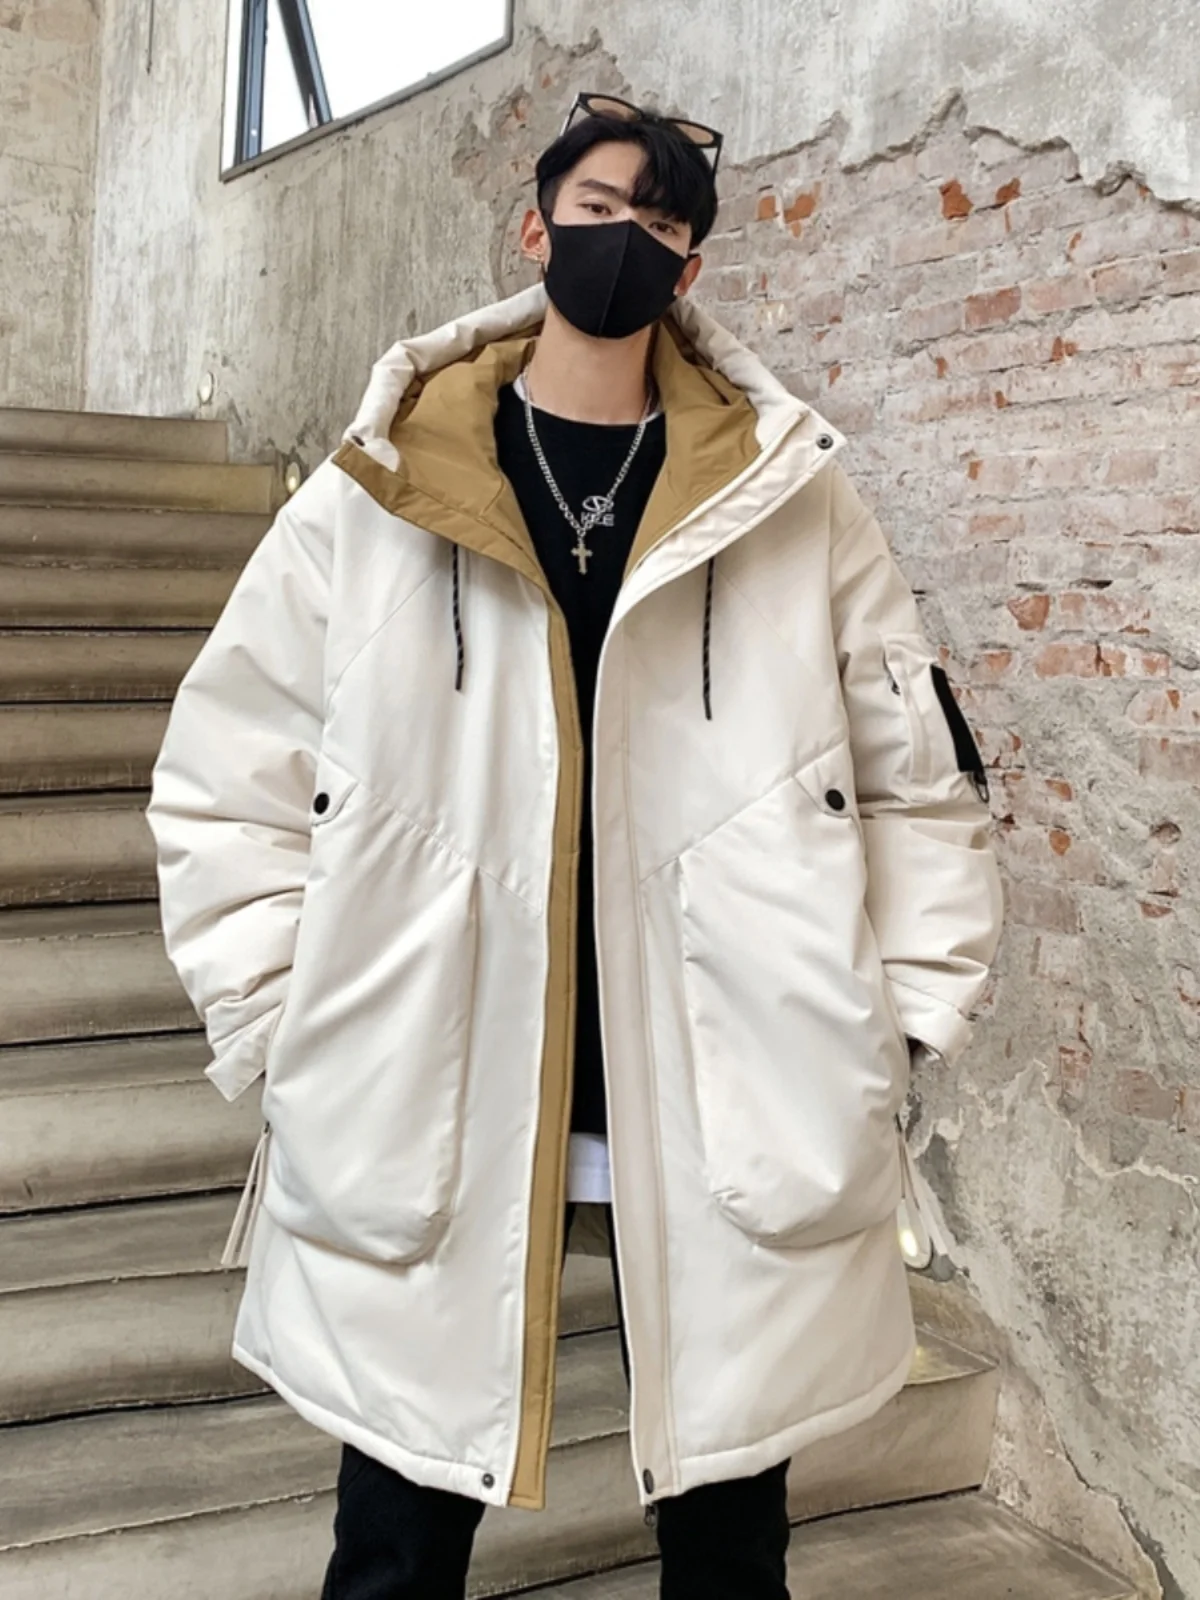 Jacket Mid-Length down Jacket Men's Thickened Warm Winter Cold-Proof Hooded Jacket BlackWhite Loose Casual Fashion All-Match 1Pc 2023 fall winter fashion quality cold proof warm and loose temperament wild simple mid length hooded down jacket women